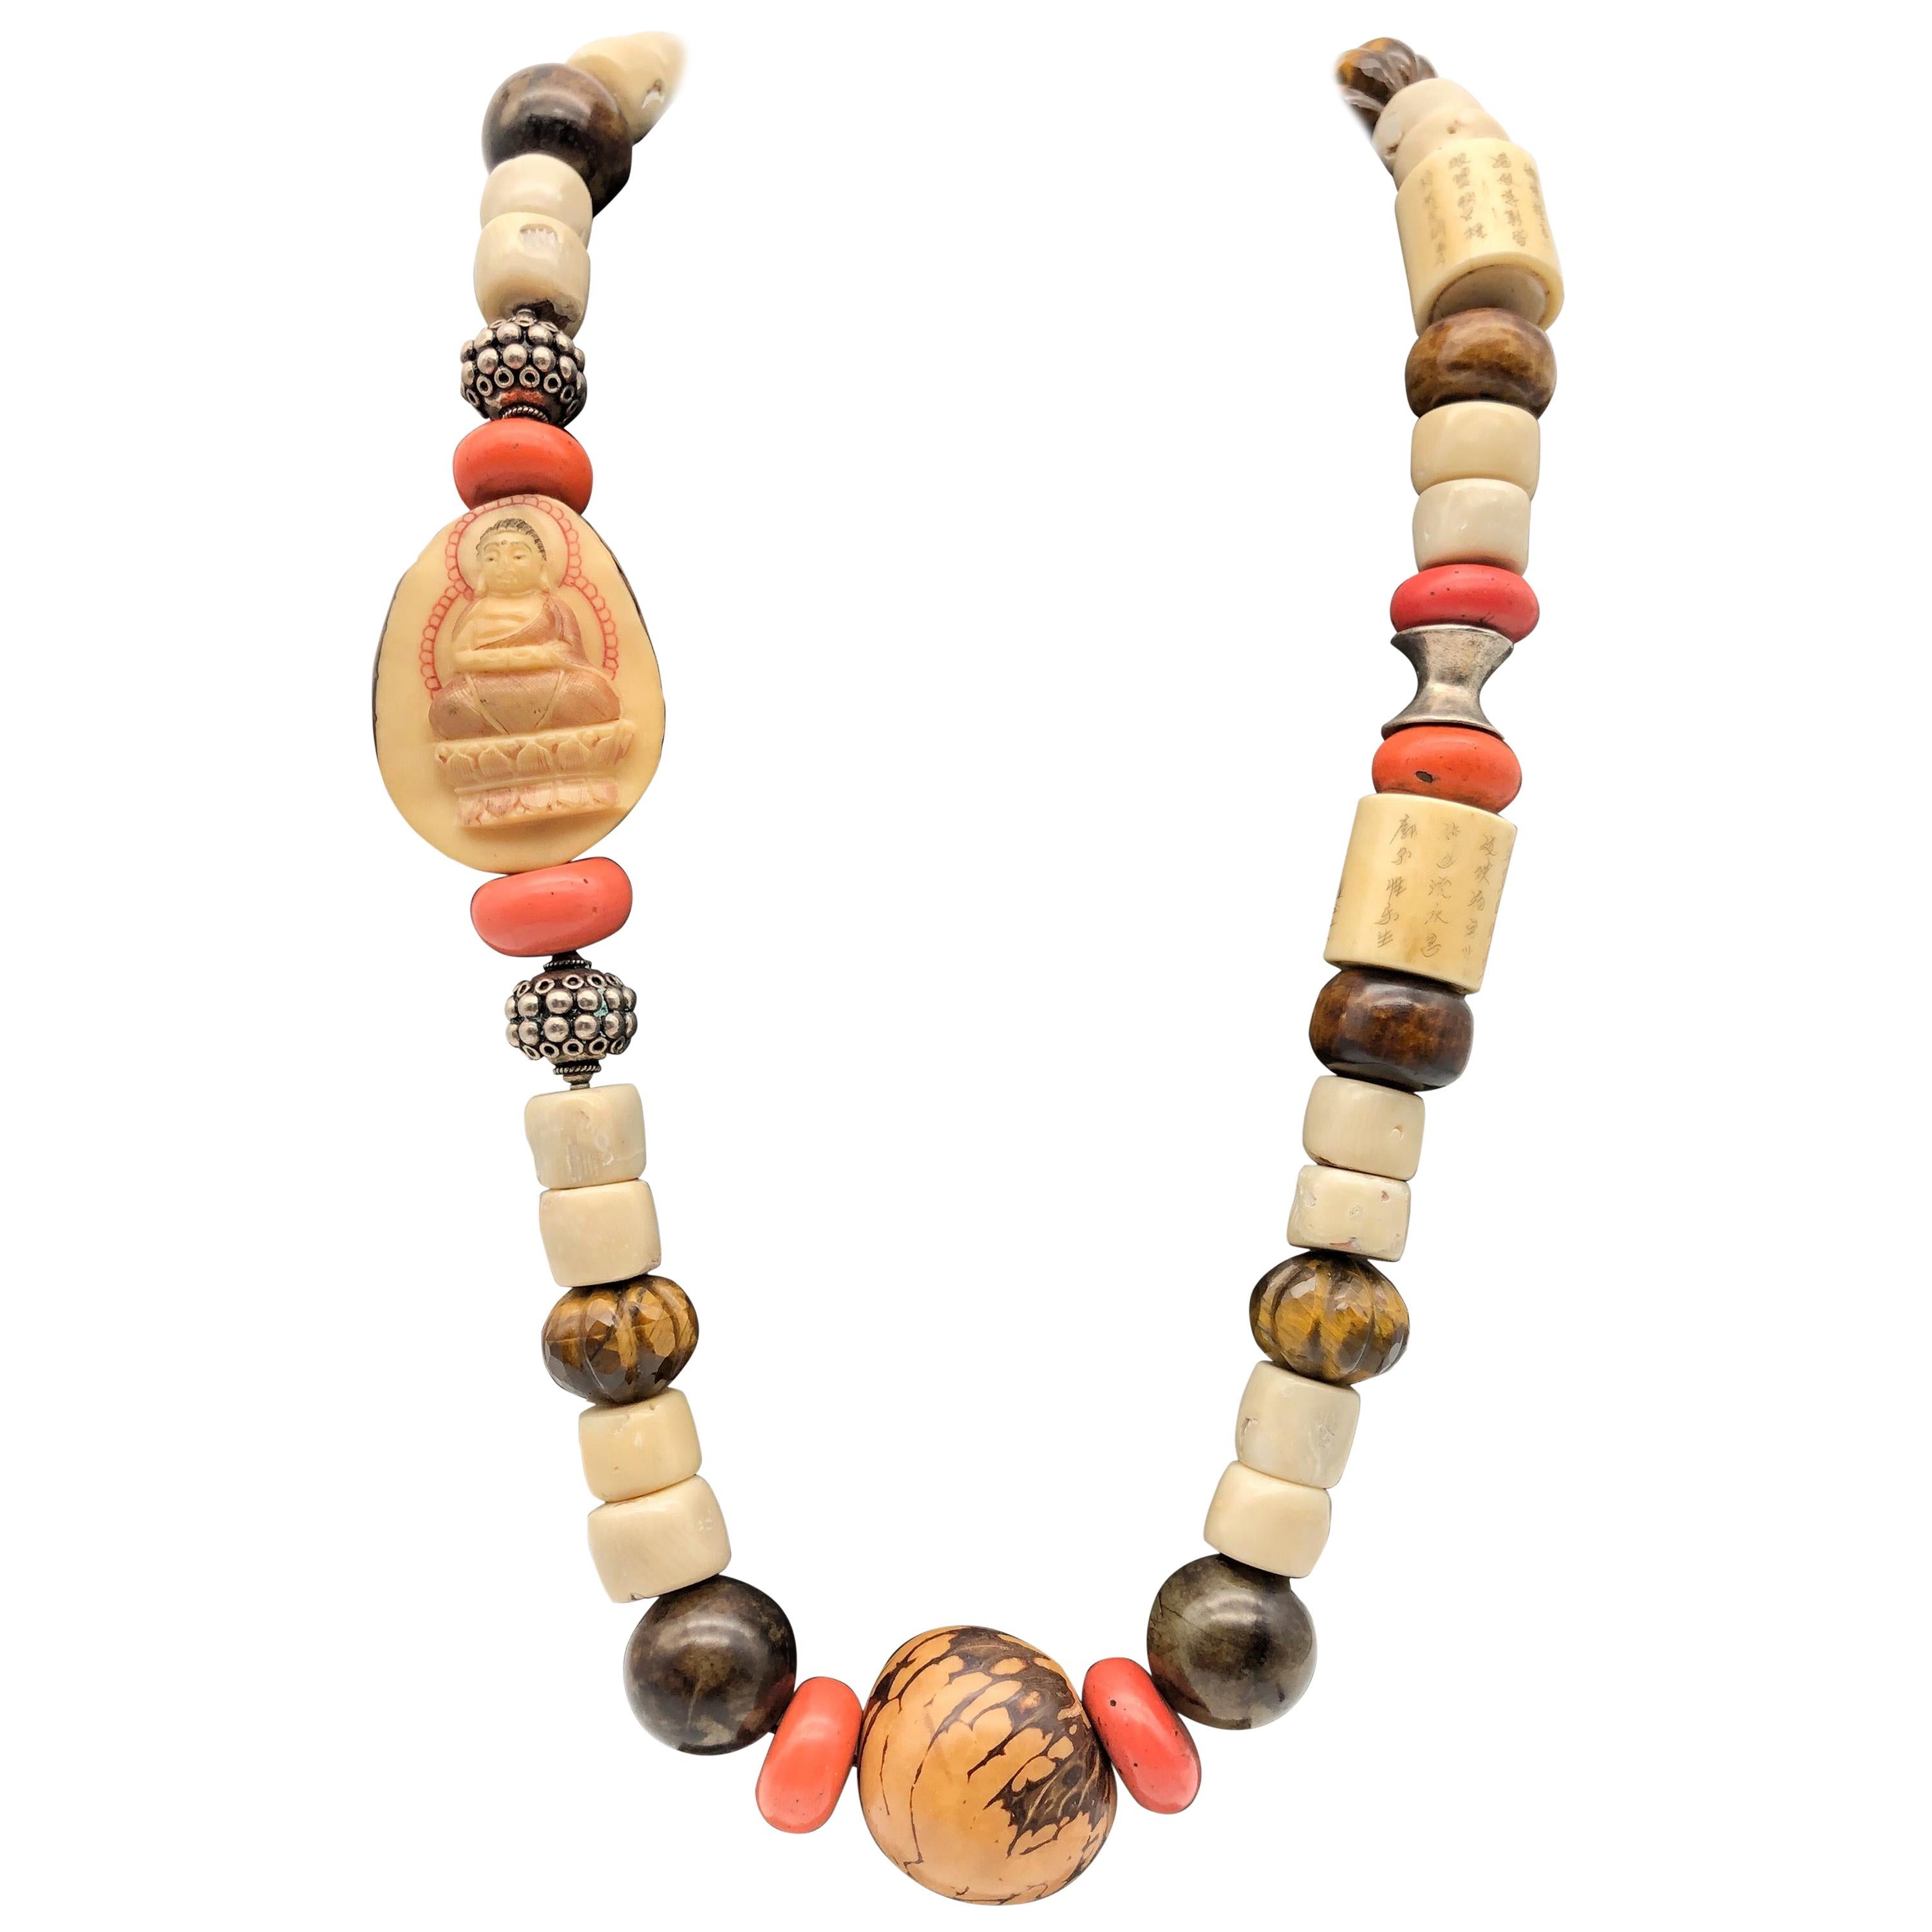 A.Jeschel Colorful Ethnic Tibetan beads and Carved Buddha necklace For Sale